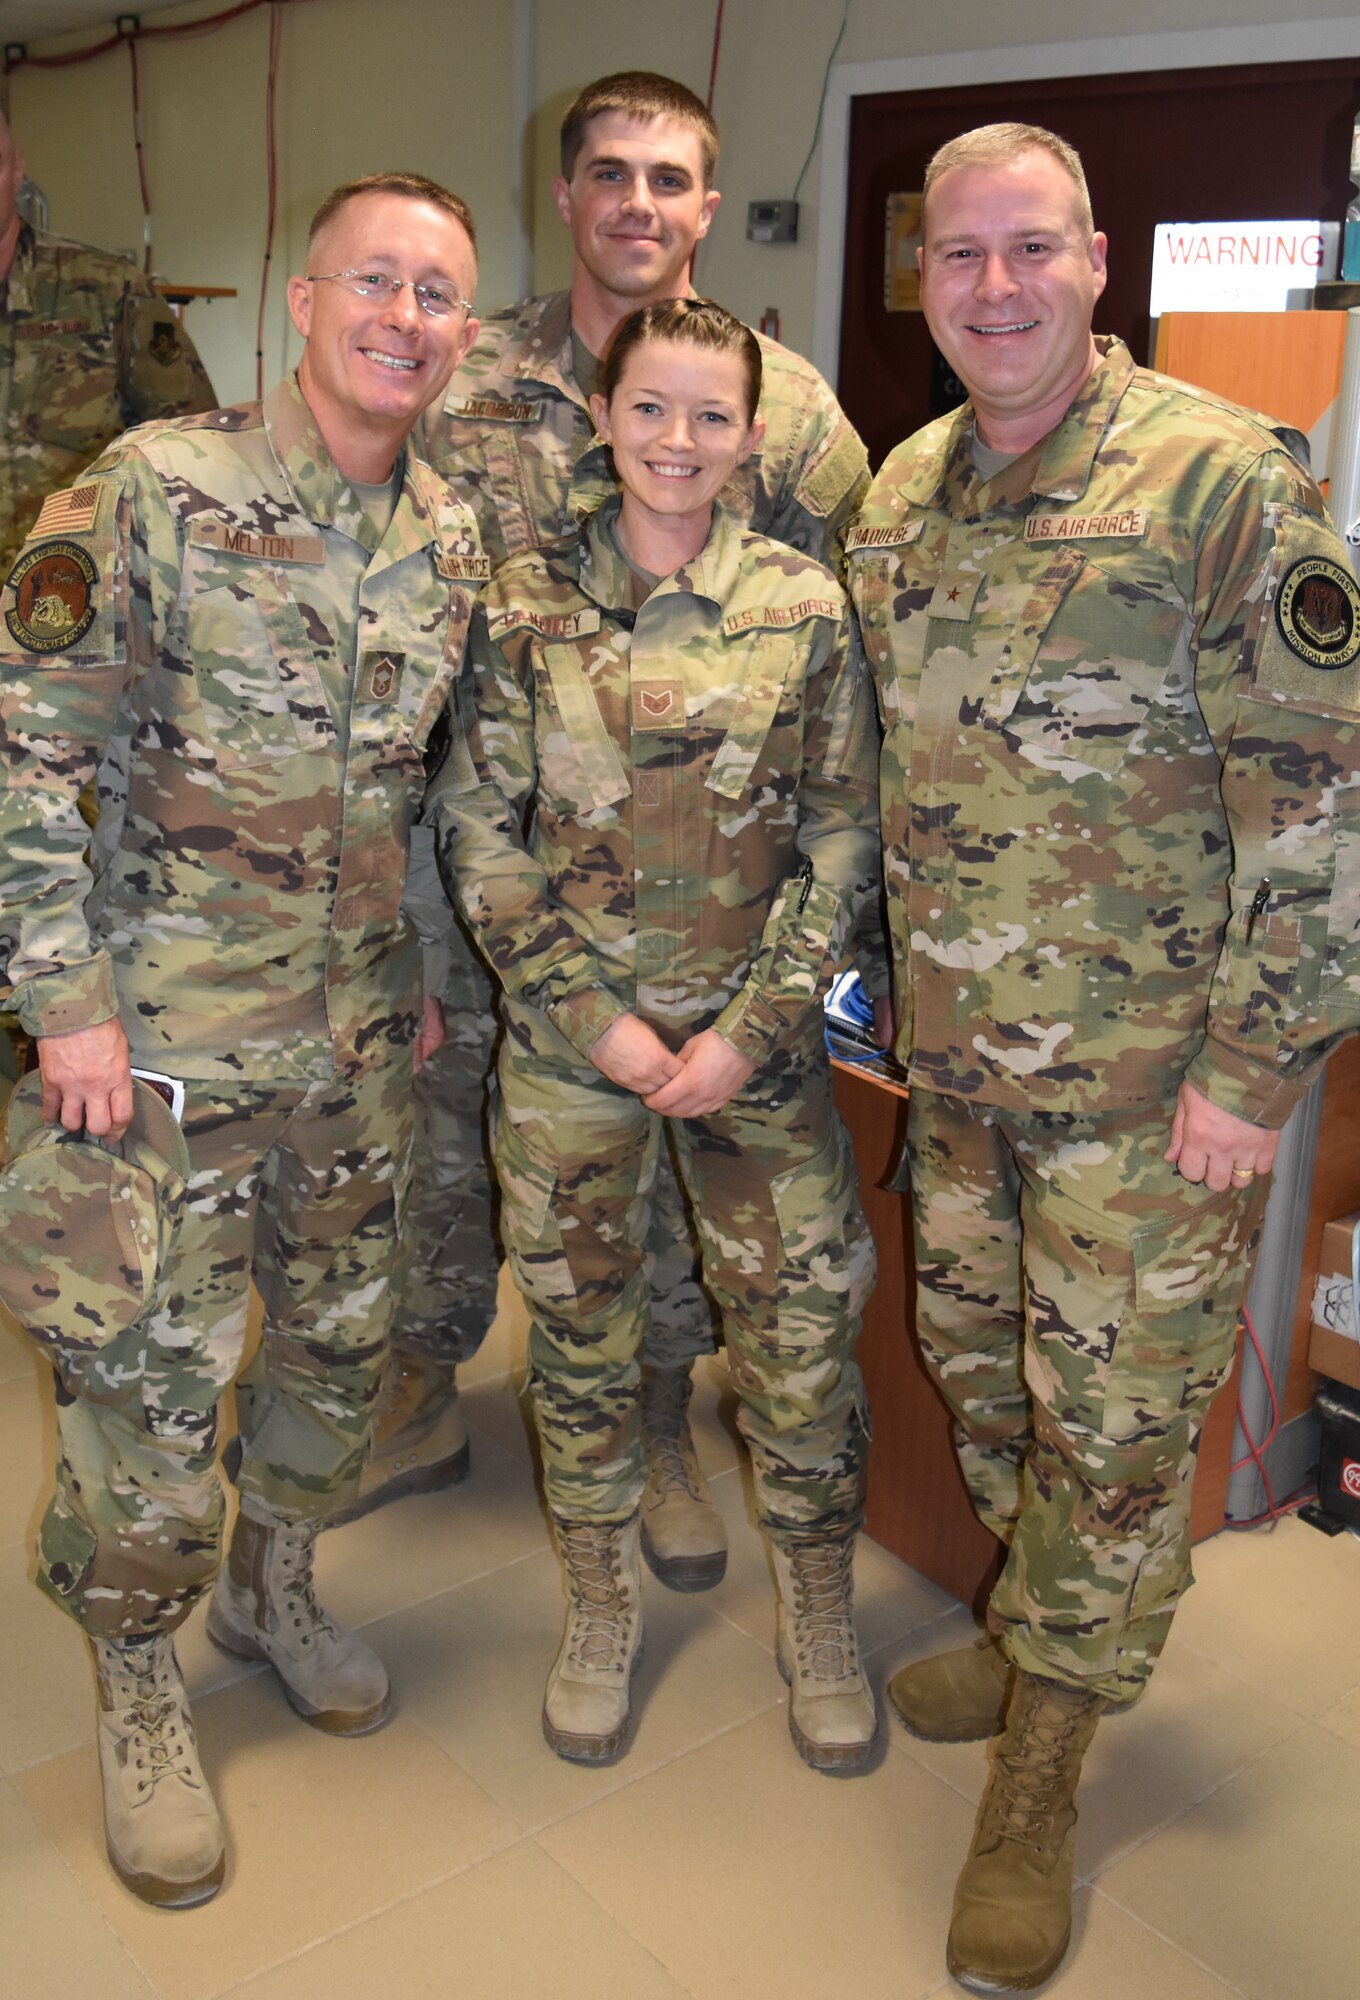 U.S. Air Force Brig. Gen. Chad Raduege, Air Combat Command director of cyberspace and information dominance, and chief information officer, right, and Chief Master Sgt. Jereme Melton, ACC communications directorate chief, left, takes a photo with Tech. Sgt. Austin Jacobson and Staff Sgt. Gabrielle Landrey from the 386th Expeditionary Communications Squadron, while visiting Ali Al Salem Air Base, Kuwait, Oct. 2, 2019. Raduege and Melton visited Airmen with the 386th Expeditionary Communications Squadron during a stop at ASAB enroute to the Air Forces Central Command A6 Commander's Summit at Al Udeid Air Base, Qatar. (U.S. Air Force photo by Chief Master Sgt. Joseph Hart)